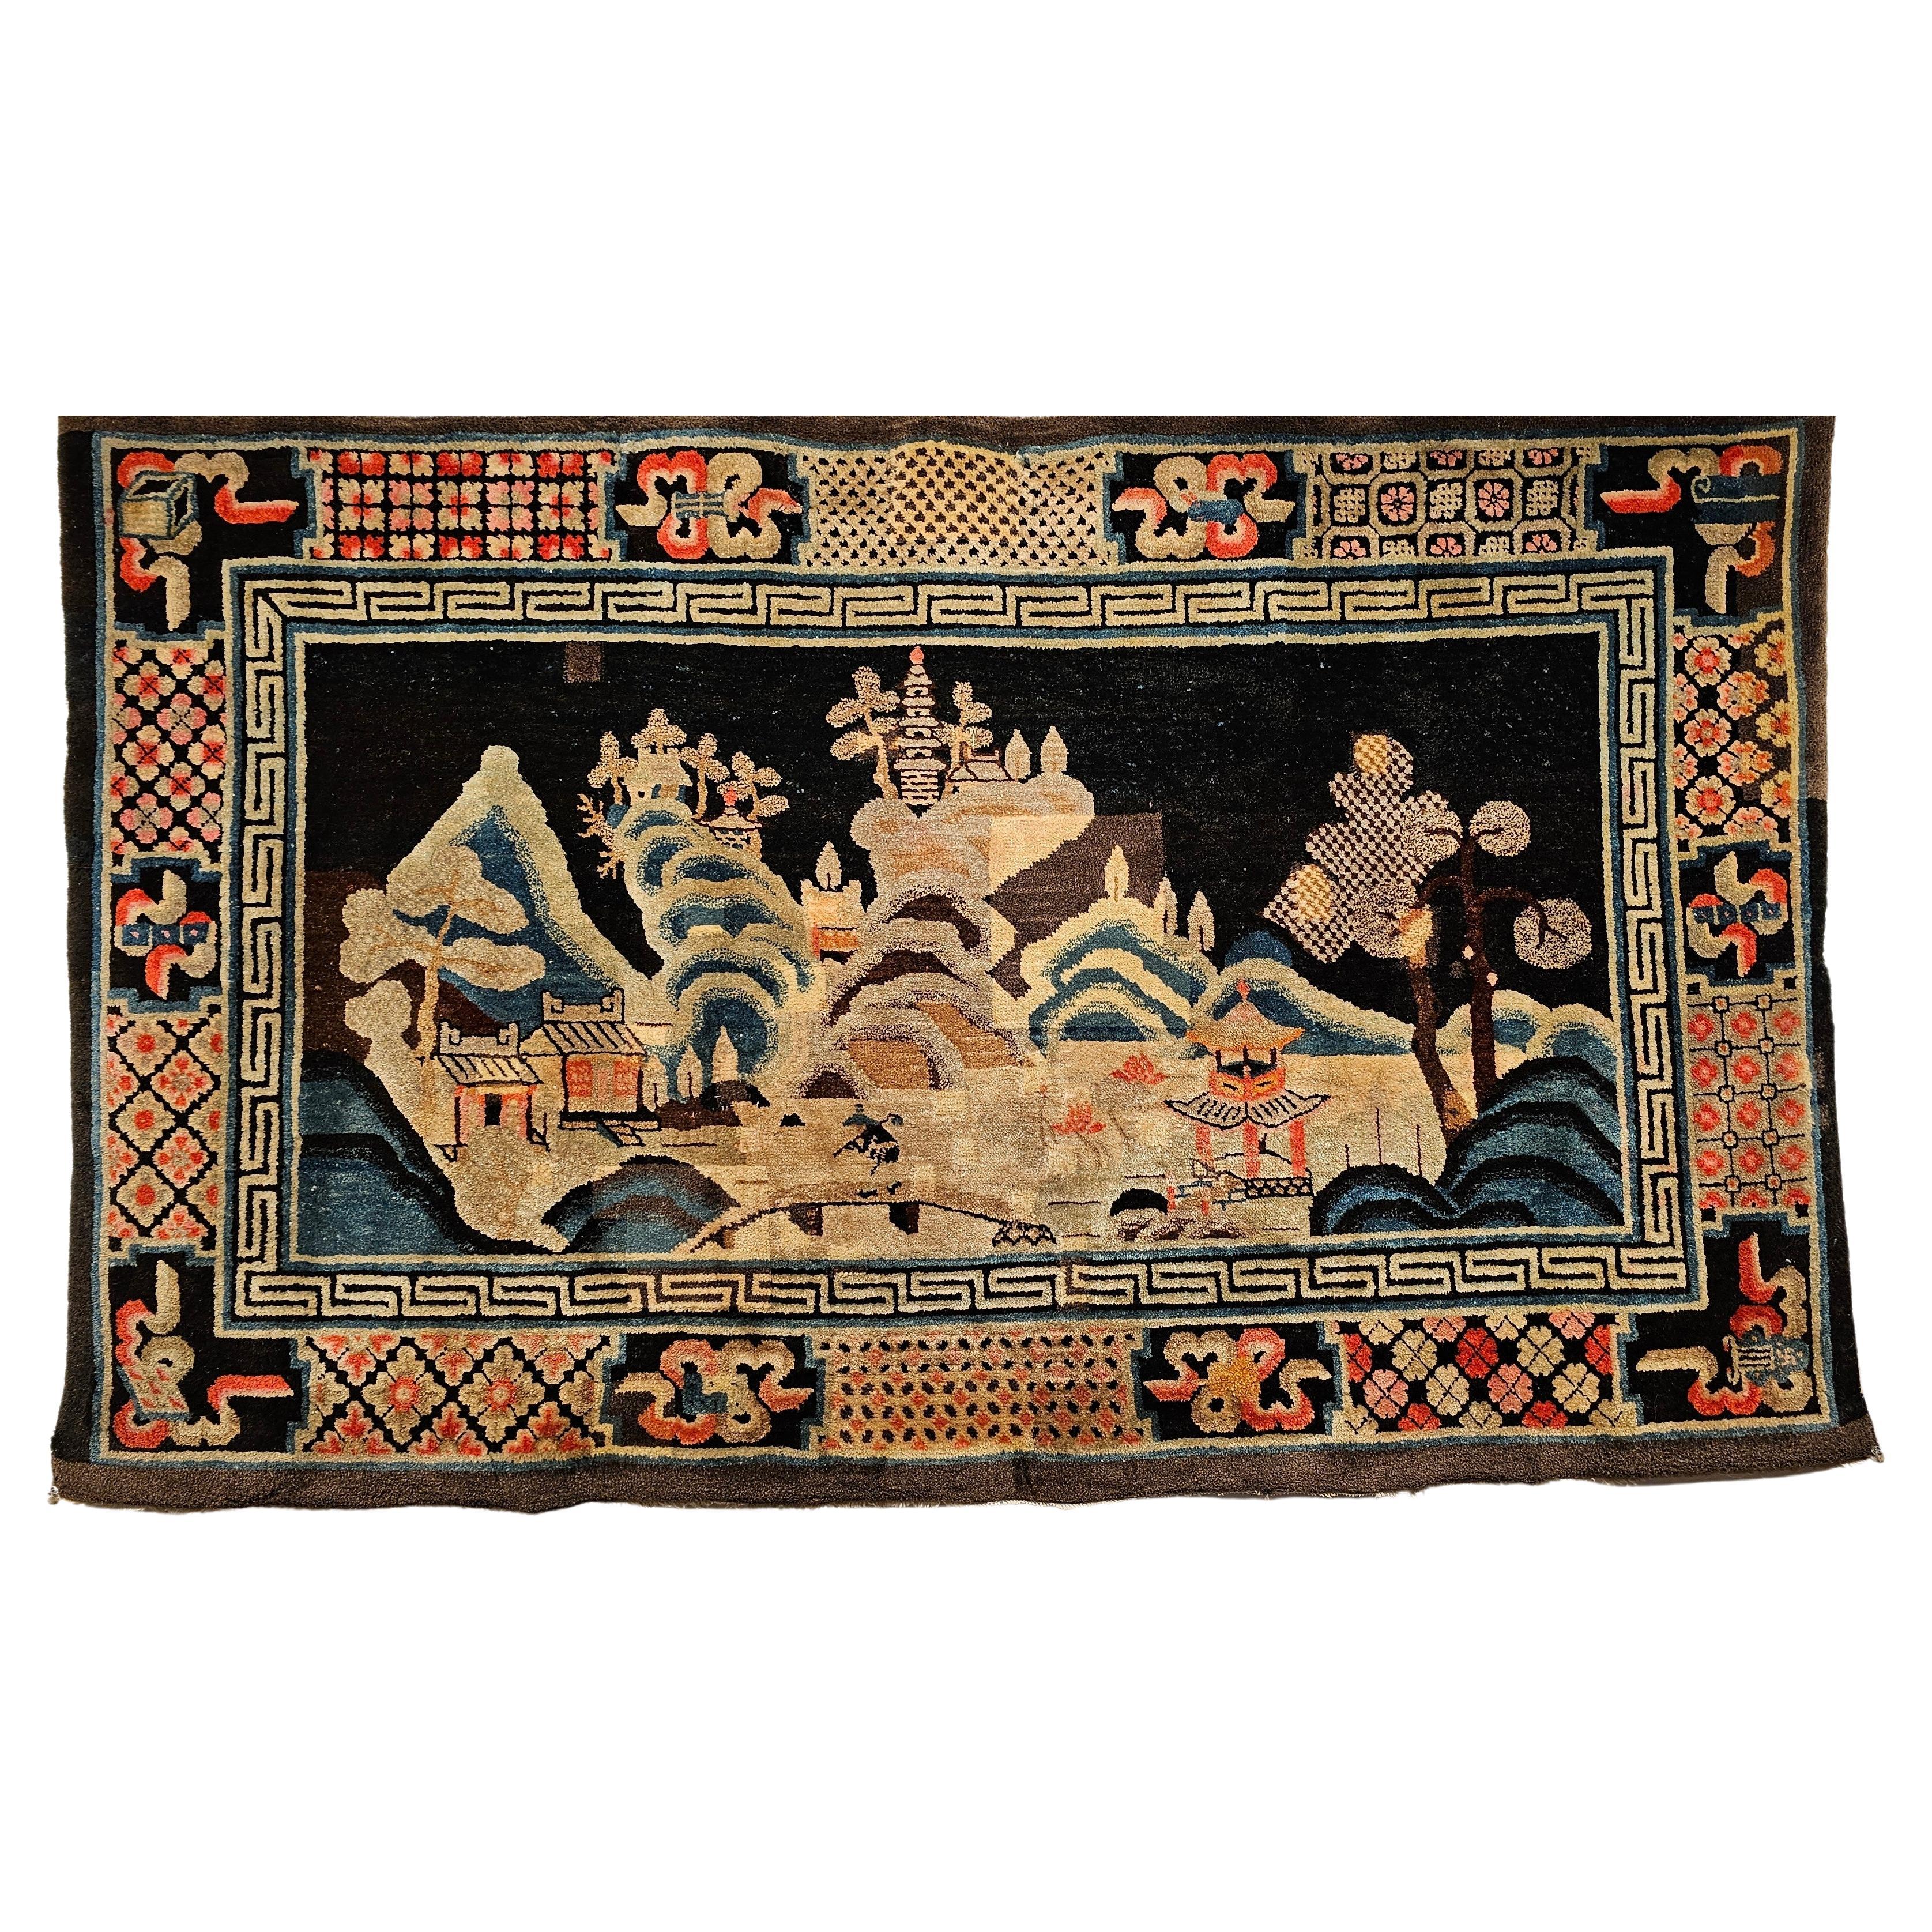 Late 1800s Ningxia Chinese Rug with A Pictorial Design of Forest, Mountains